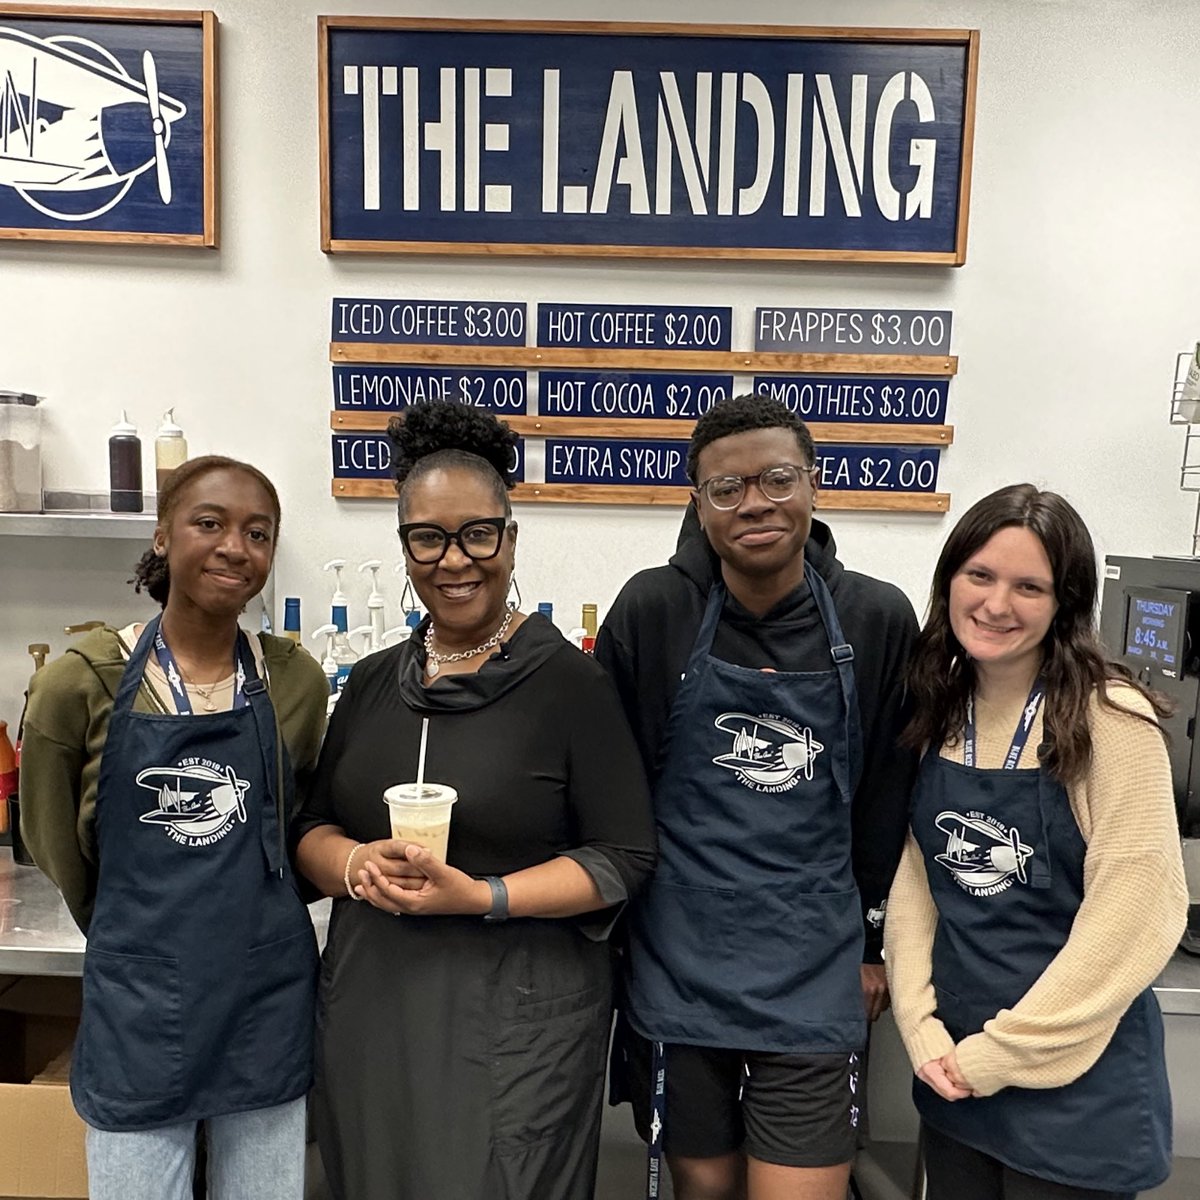 We welcomed district superintendent Dr. Thompson this morning as she kicks off her “coffee crawl” of high school coffee shops. Watch for us in the next Strategic Plan Van video! 💙✈️ #WPSproud #WeFlyTogether